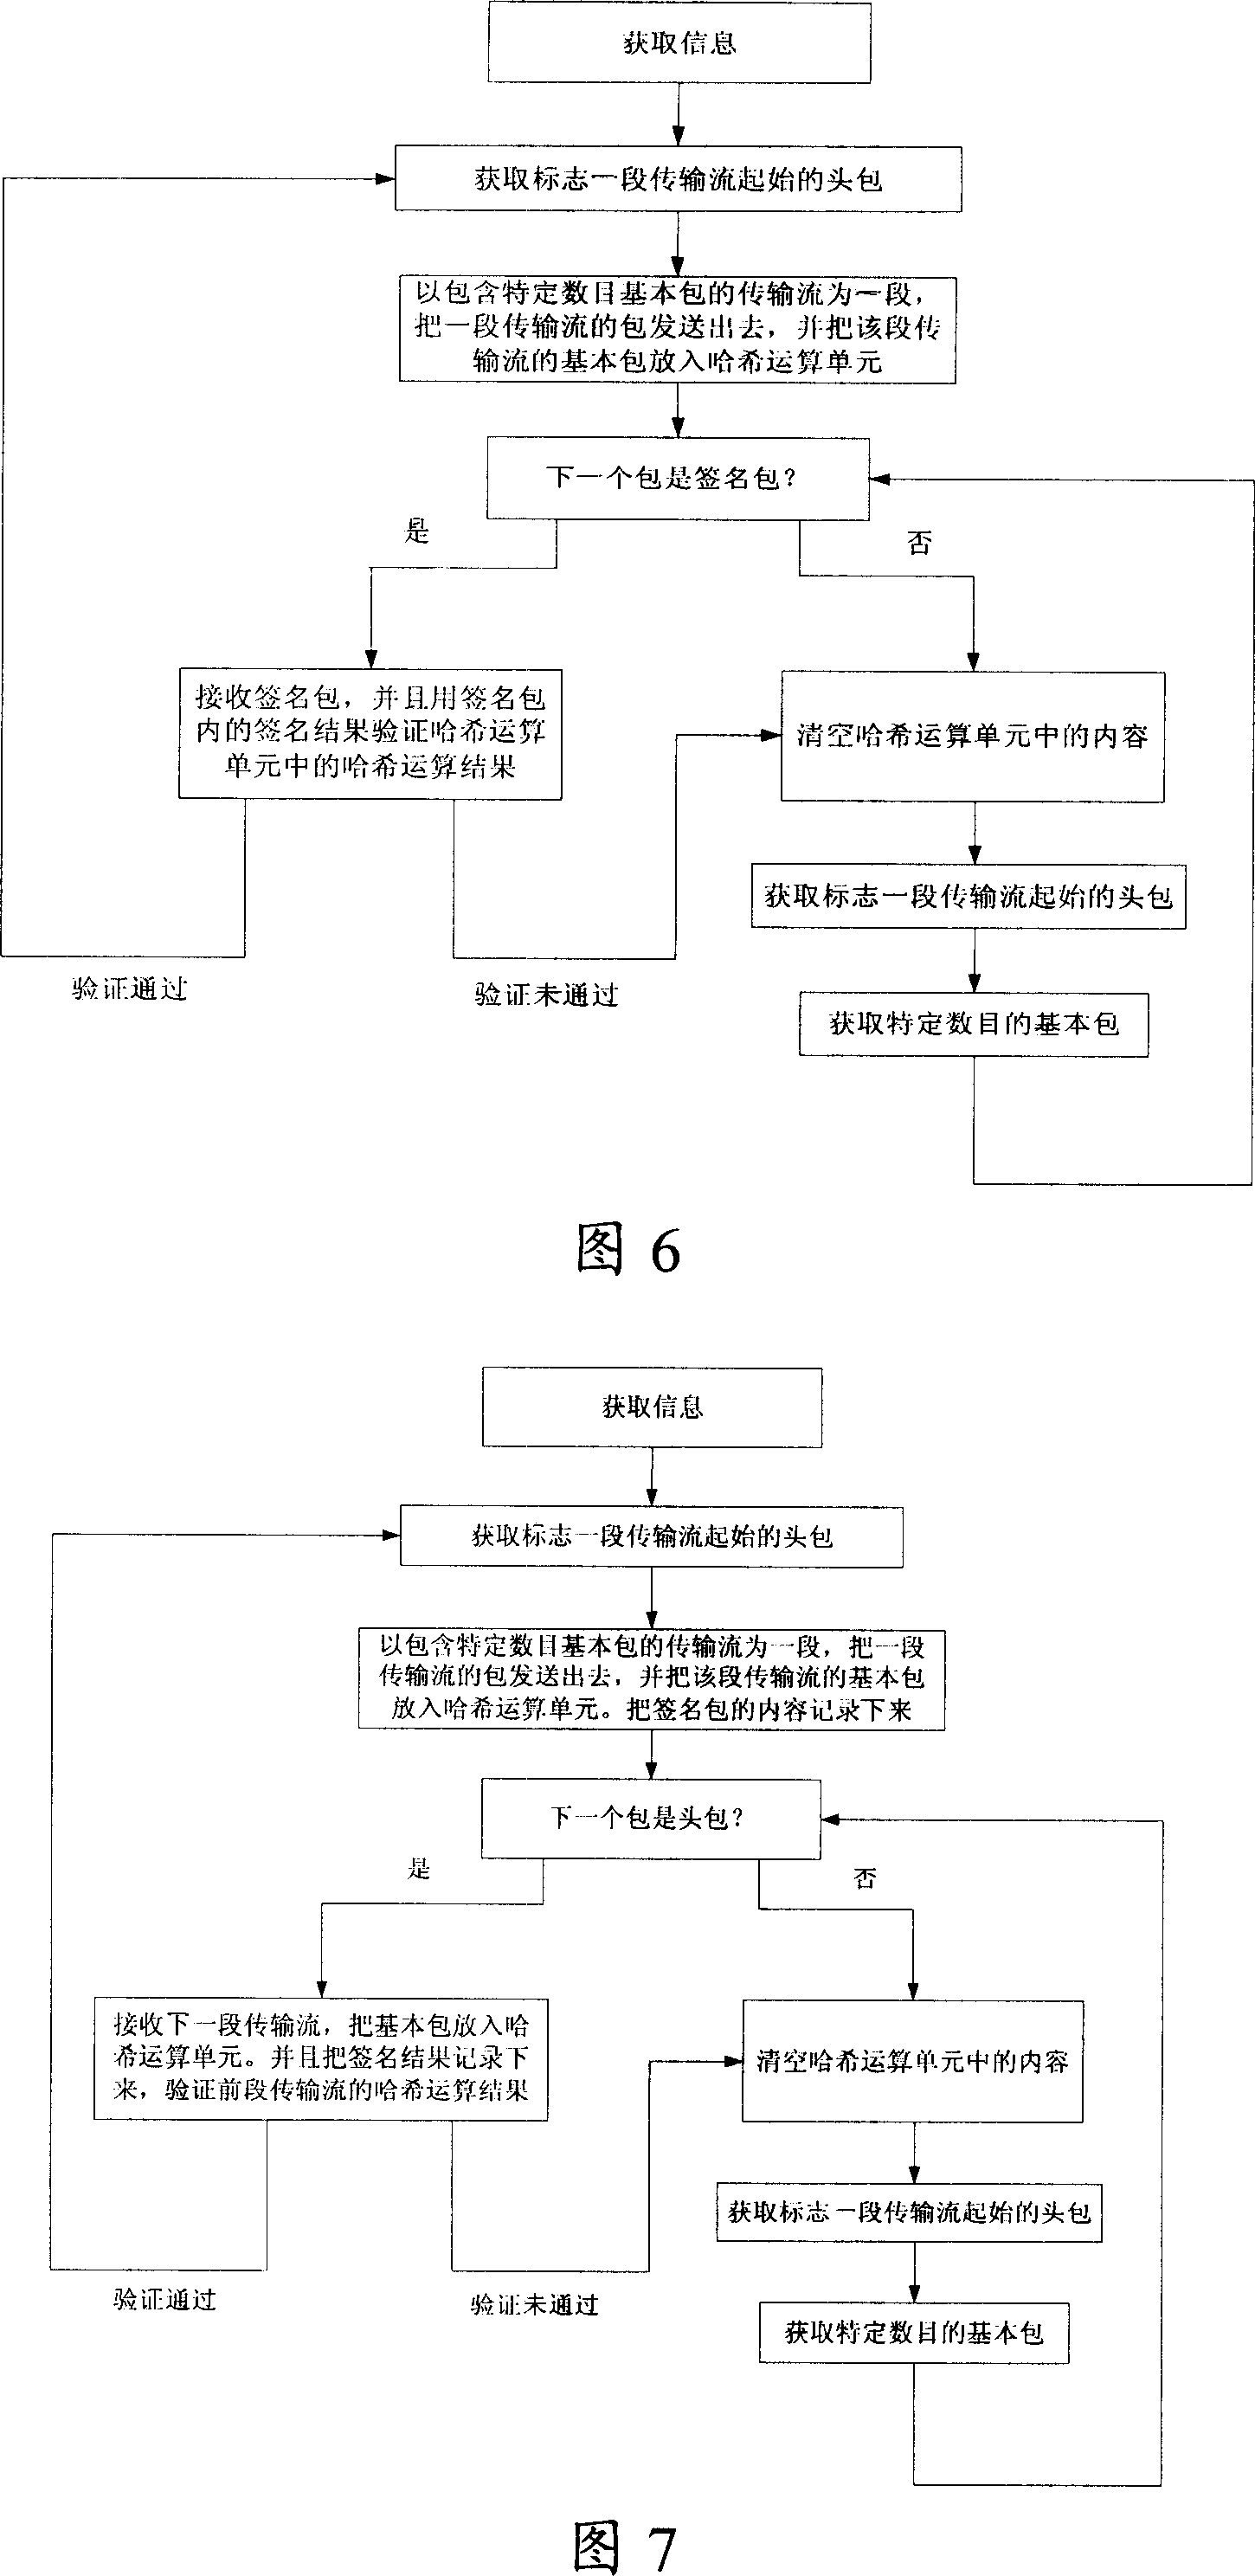 Method for real-time inserting signature and identifying signature indigit TV transmission flow